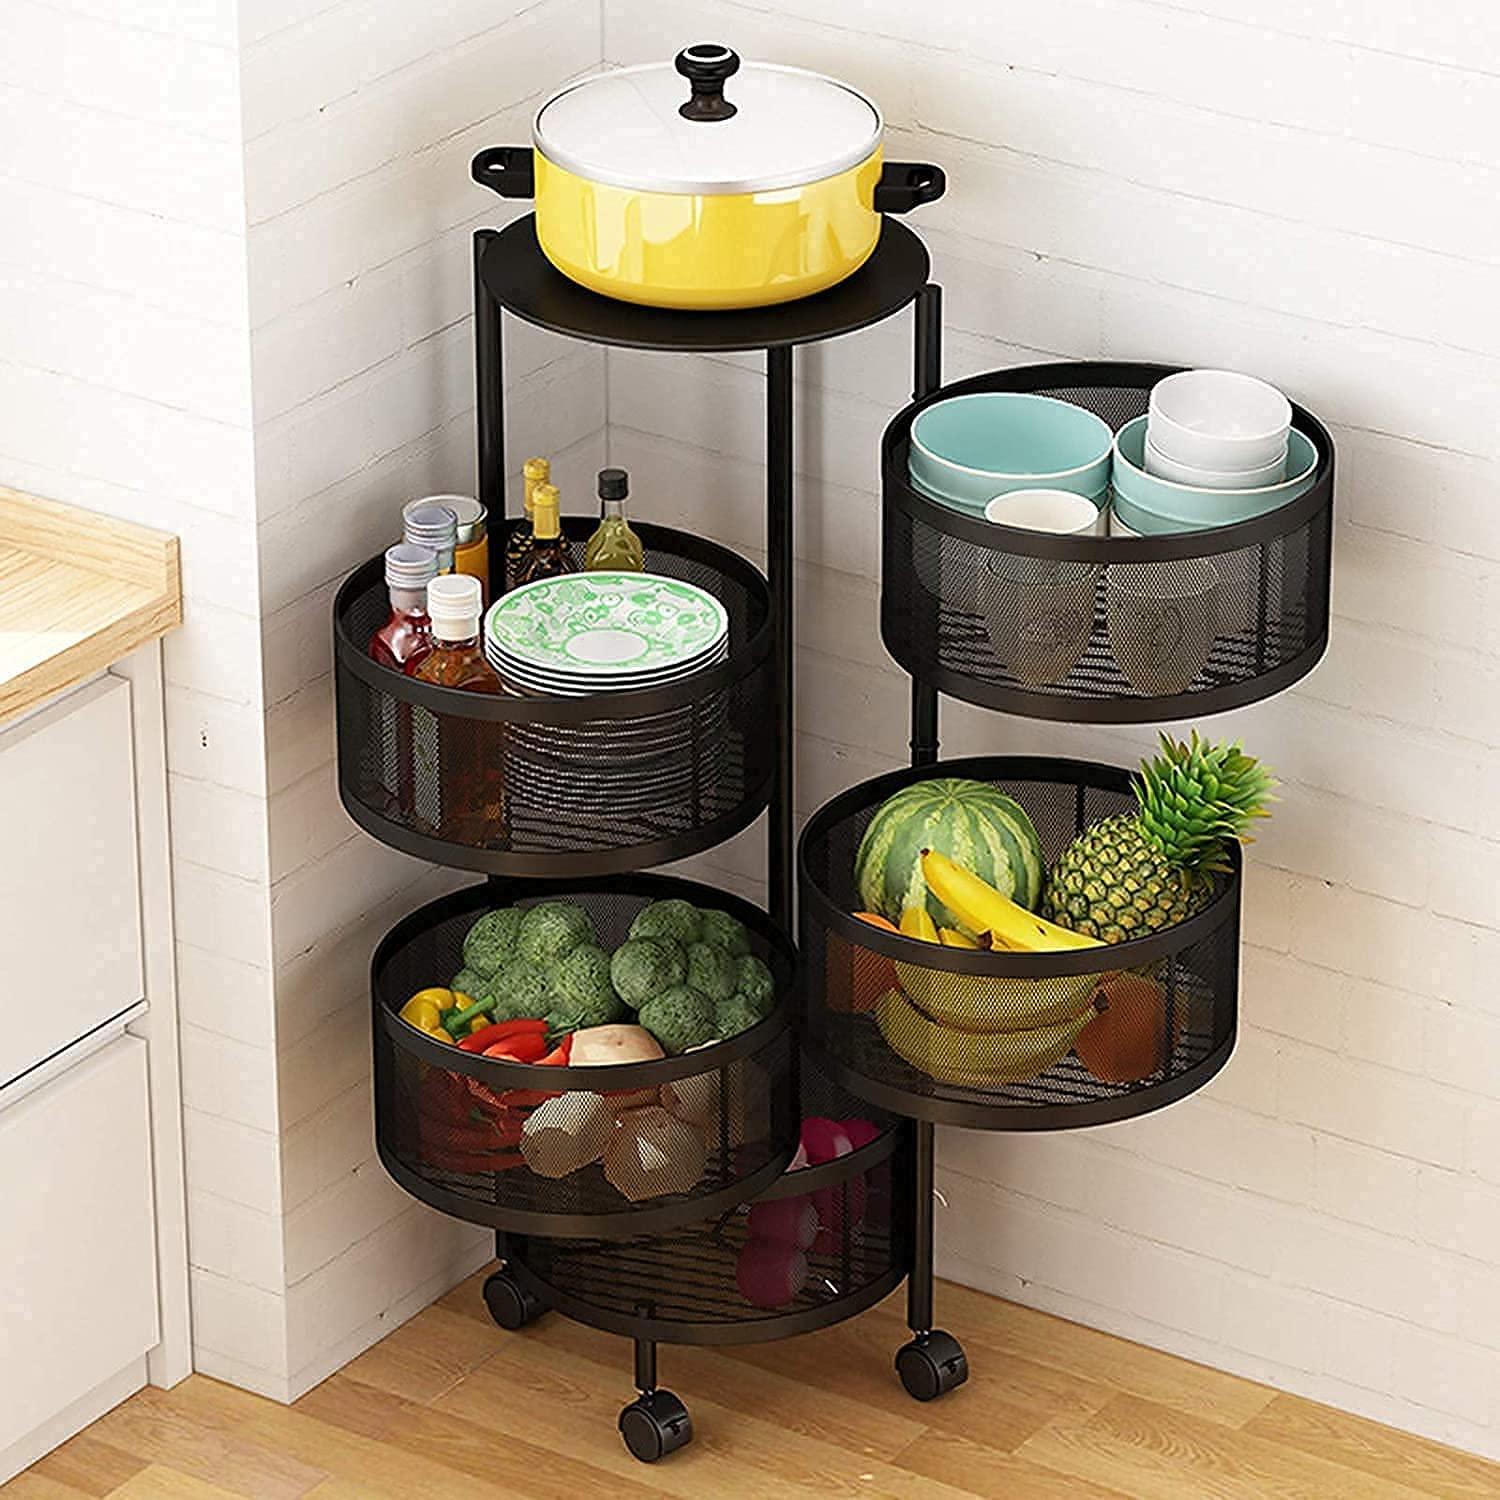 Multipurpose Kitchen Trolley with Rotating Basket: Use It for Fruits, Vegetables, Spices, or Anything Else - GADGET WAGON Kitchen Storage